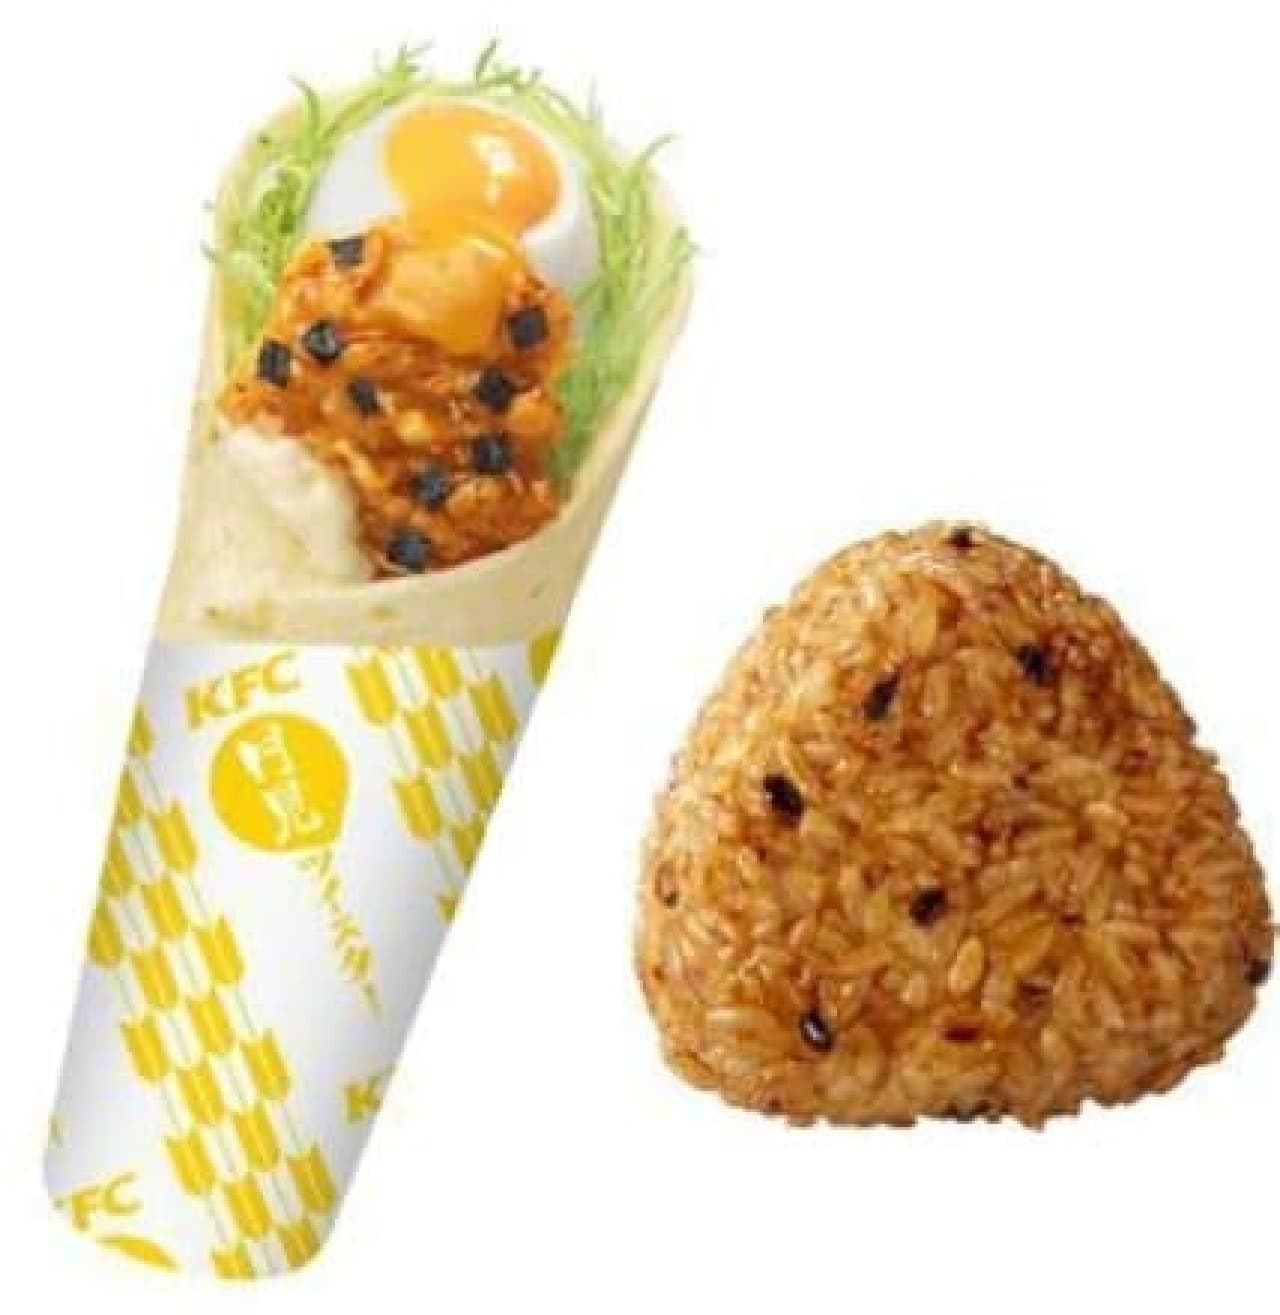 Tsukimi Twister (left), grilled rice balls with five grains